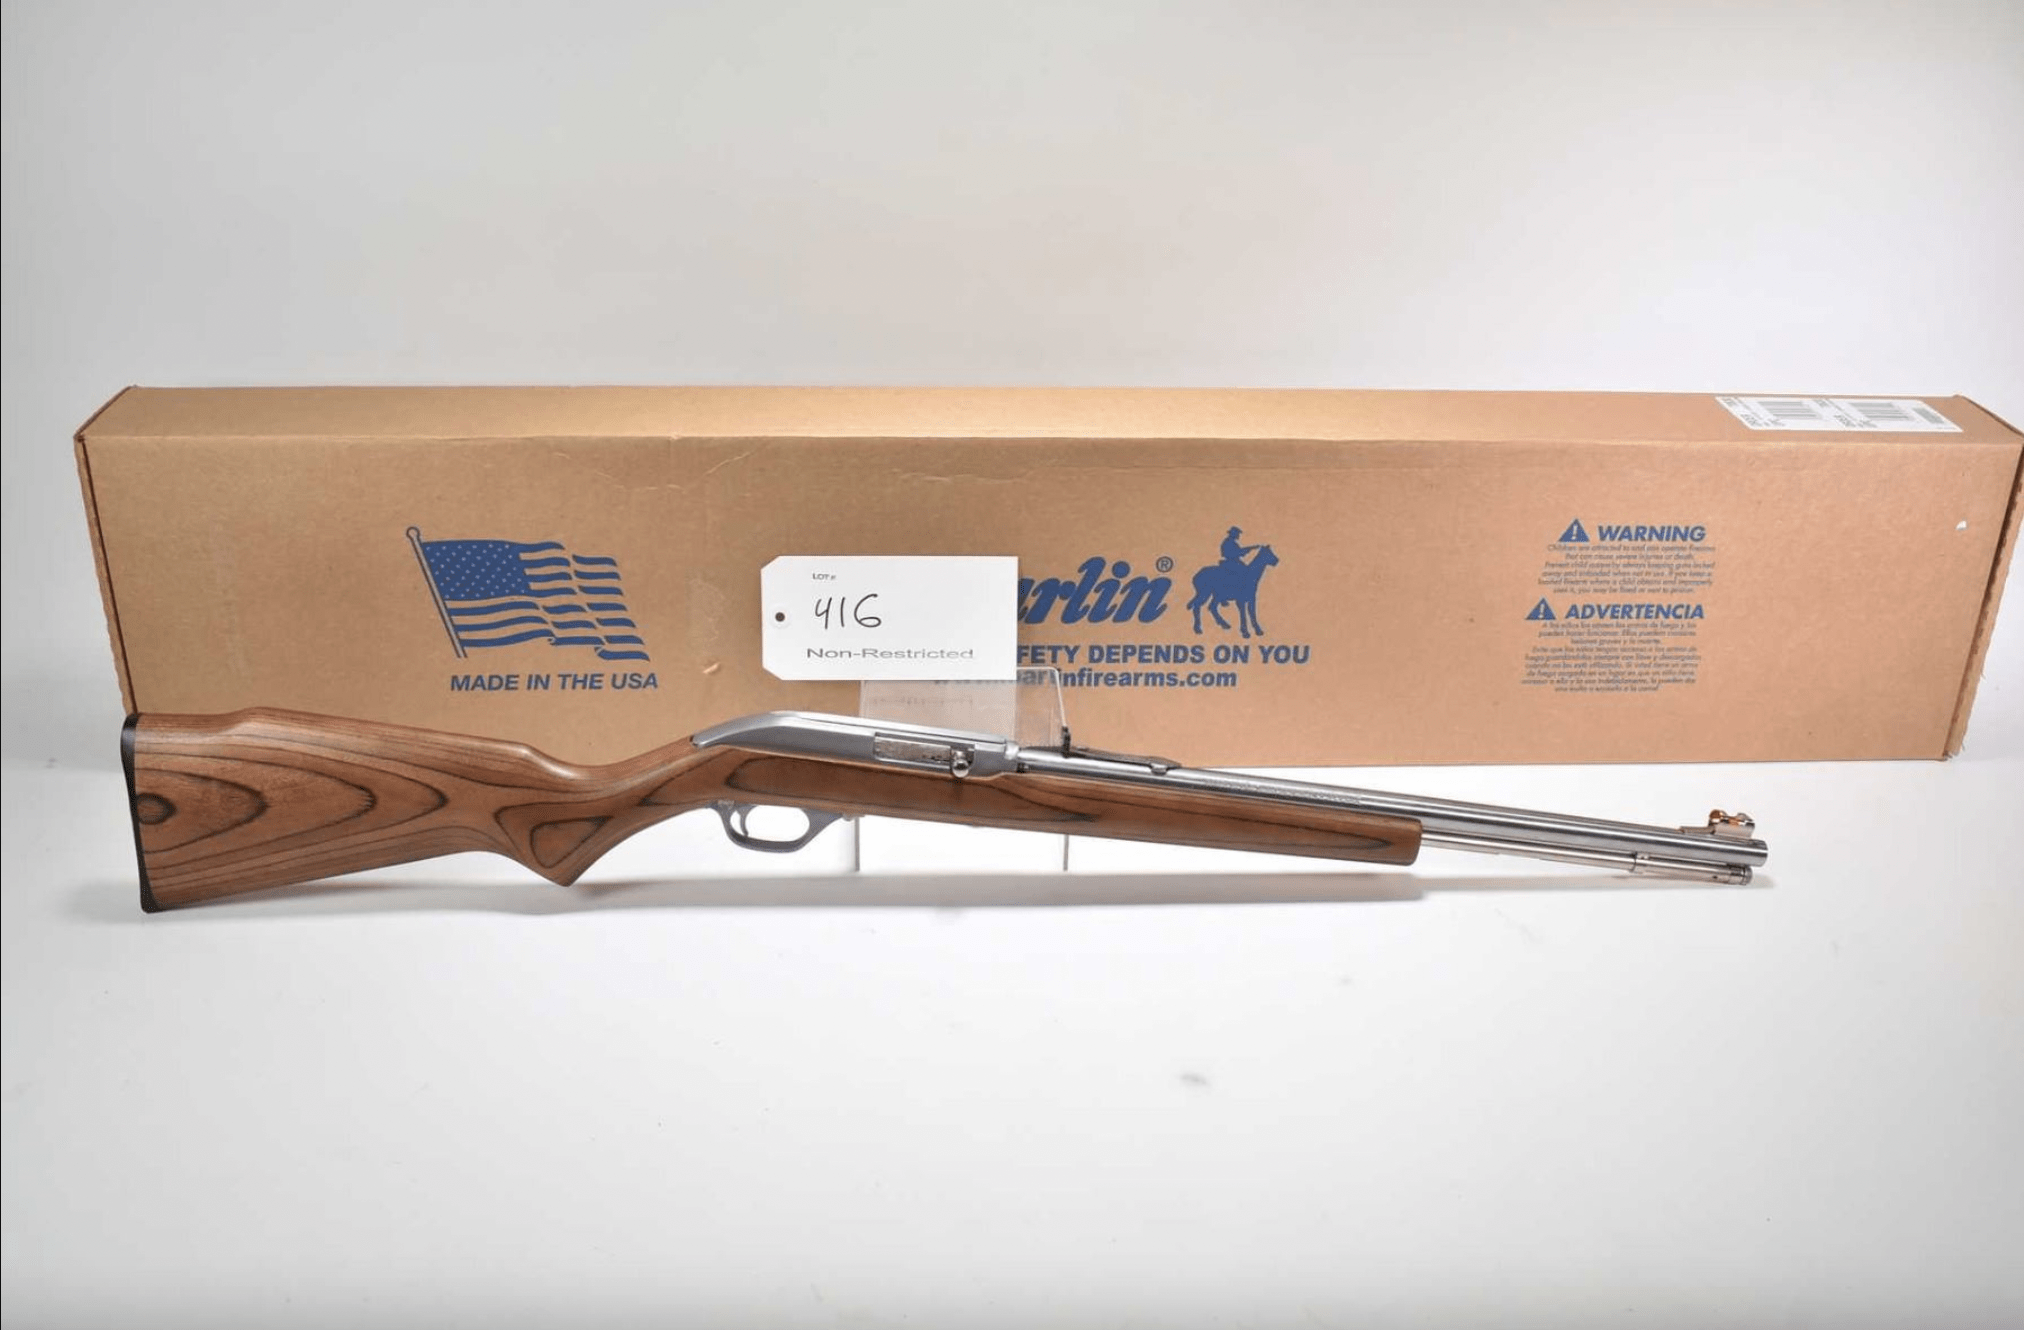 The Model 60 is well known as an introductory rifle.